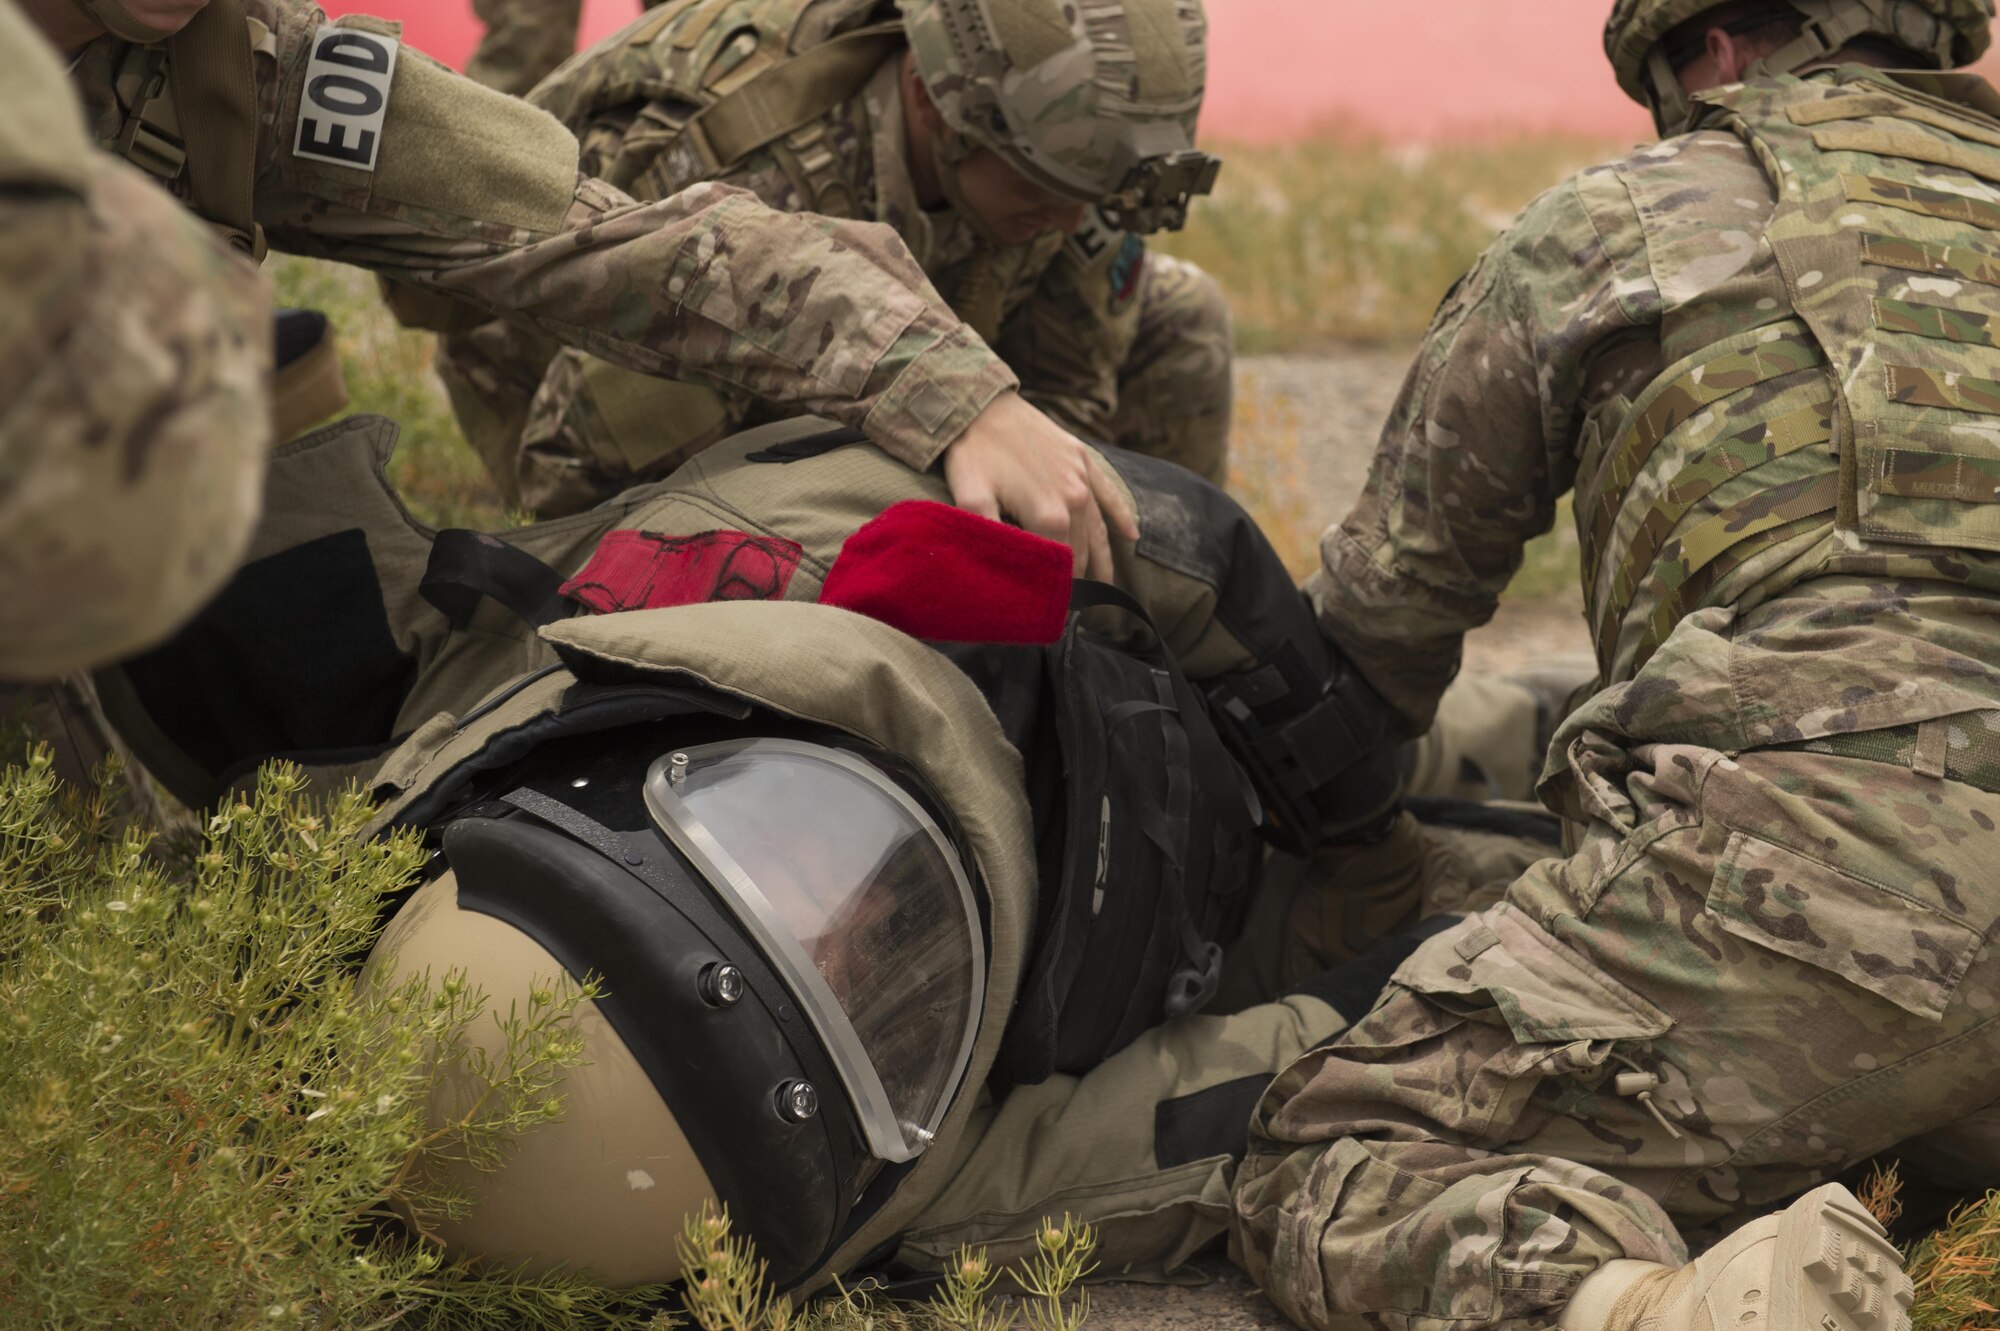 Explosive Ordnance Disposal Airmen assess a simulated casualty during a Tactical Combat Casualty Care exercise at Holloman Air Force Base, N.M., on April 31, 2017. The training focuses on individual trauma, tools, techniques, and treatment procedures. The exercise also included the use of moulage, non-lethal training munitions, trained role-players, and a multitude of other artificial stressors. (U.S. Air Force Photo by Senior Airman Chase Cannon)